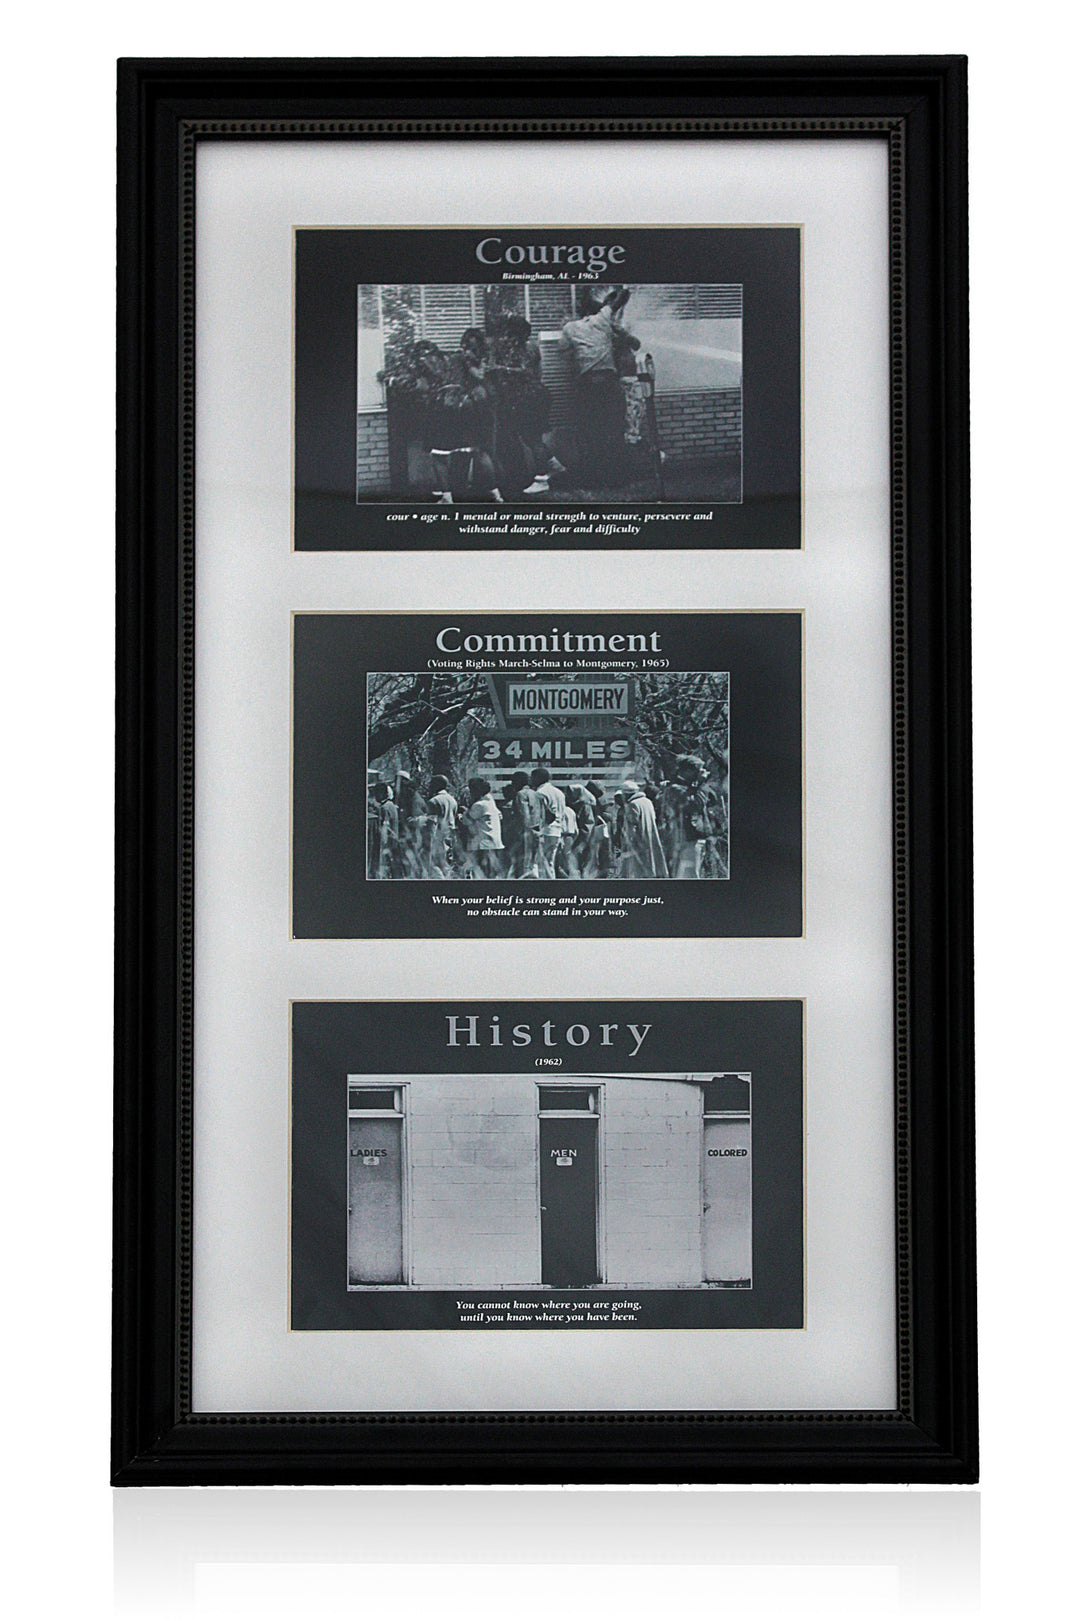 Courage, Commitment and History by D'azi Productions (Black Frame)